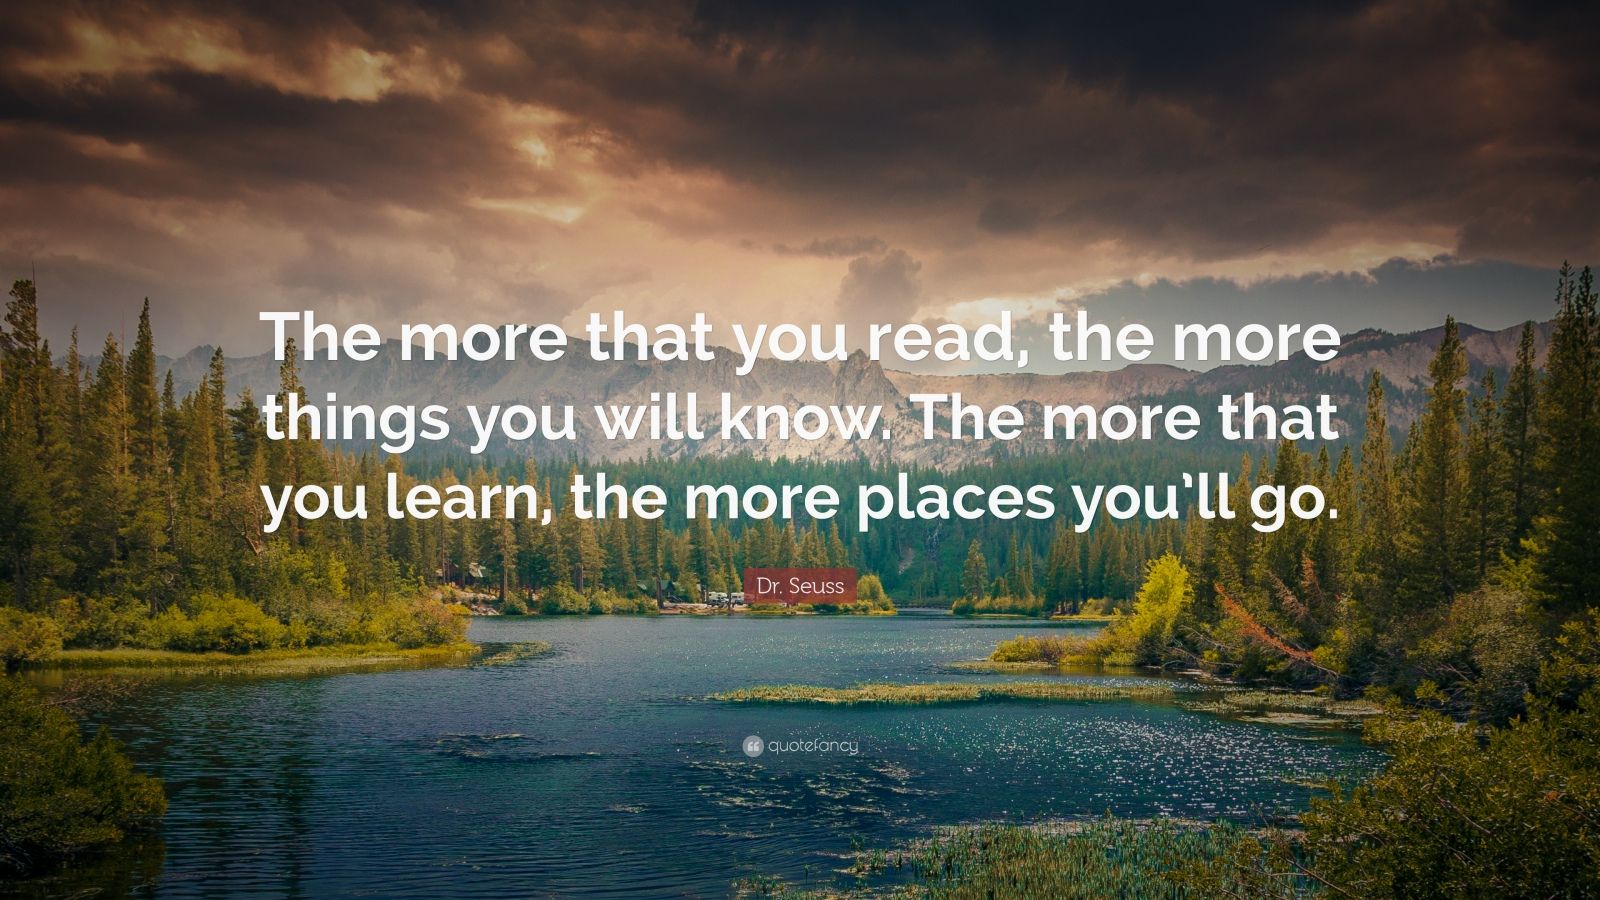 Dr. Seuss Quote: “The more that you read, the more things you will know ...